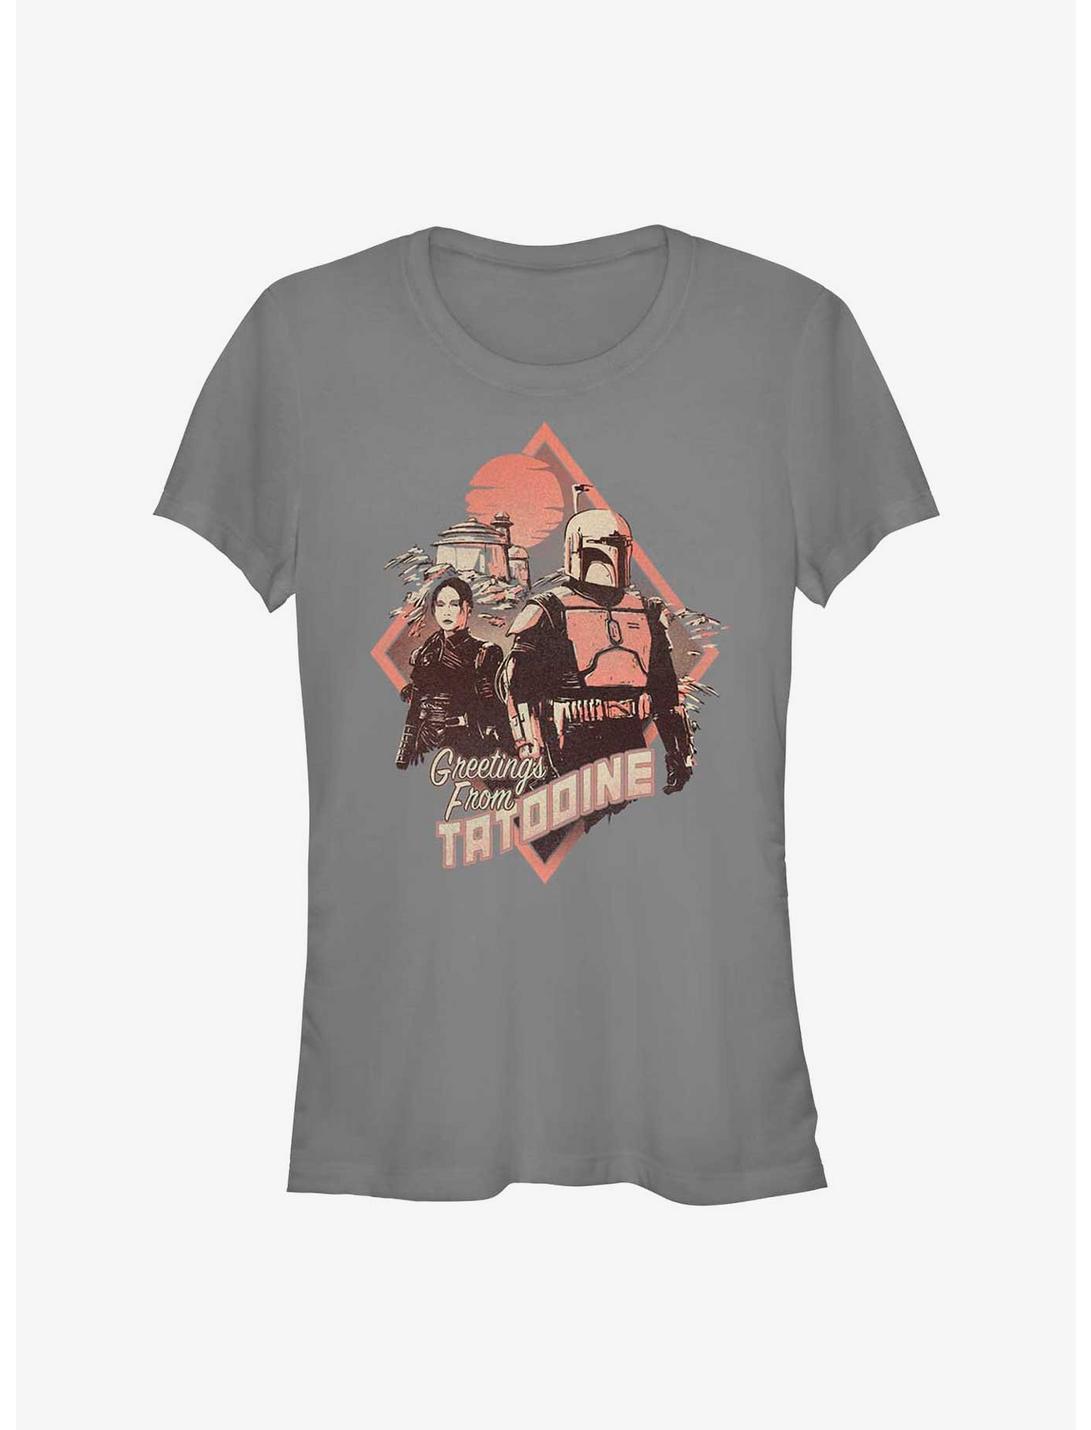 Star Wars The Book Of Boba Fett Greeting From Tatooine Girls T-Shirt, CHARCOAL, hi-res